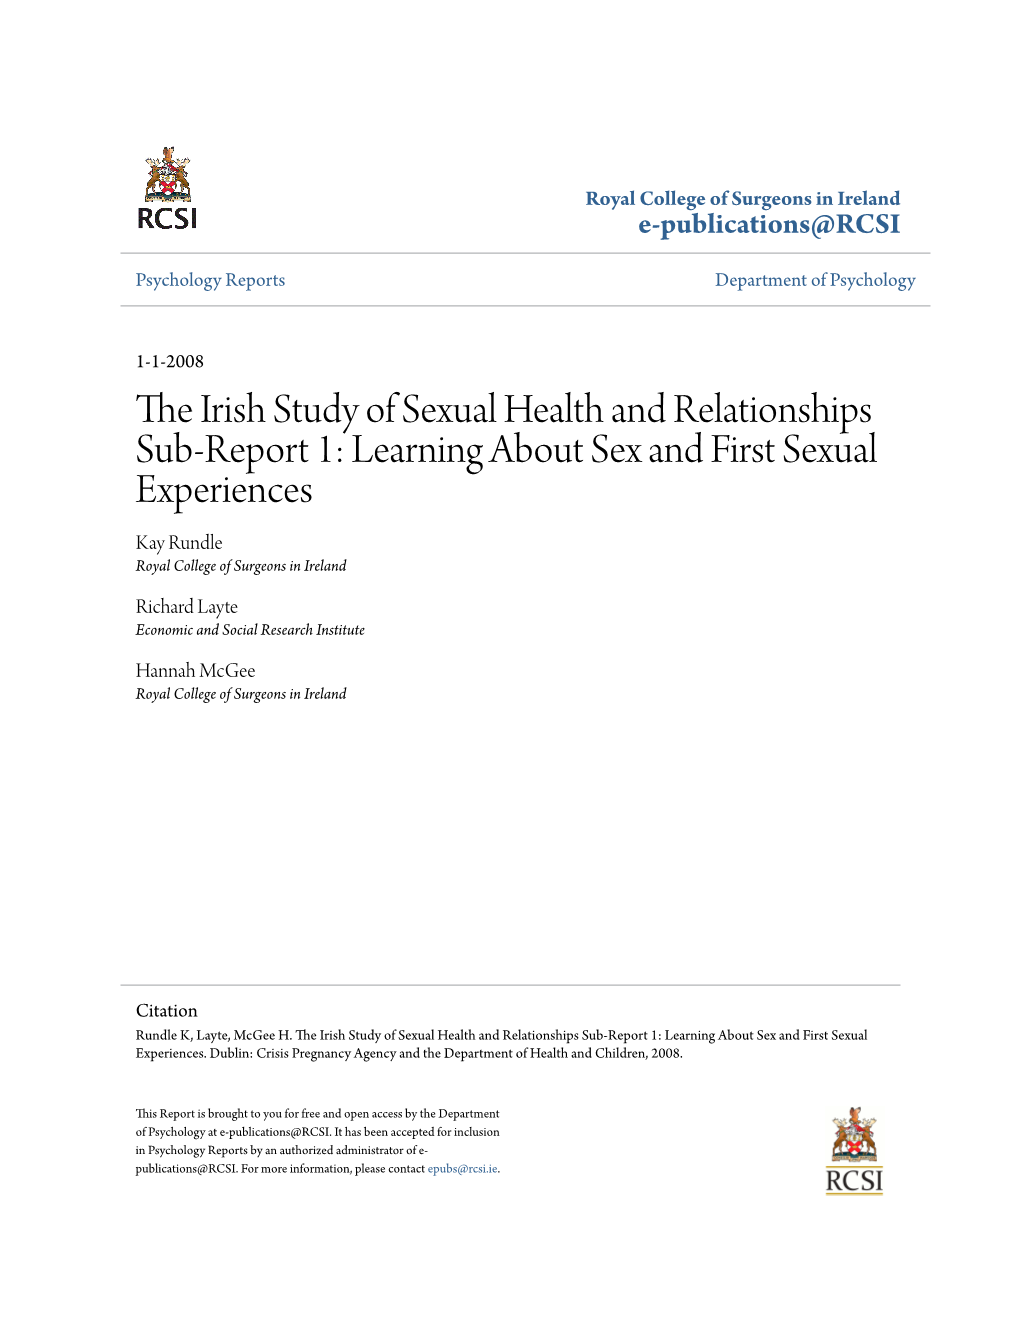 The Irish Study of Sexual Health and Relationships Sub-Report 1: Learning About Sex and First Sexual Experiences